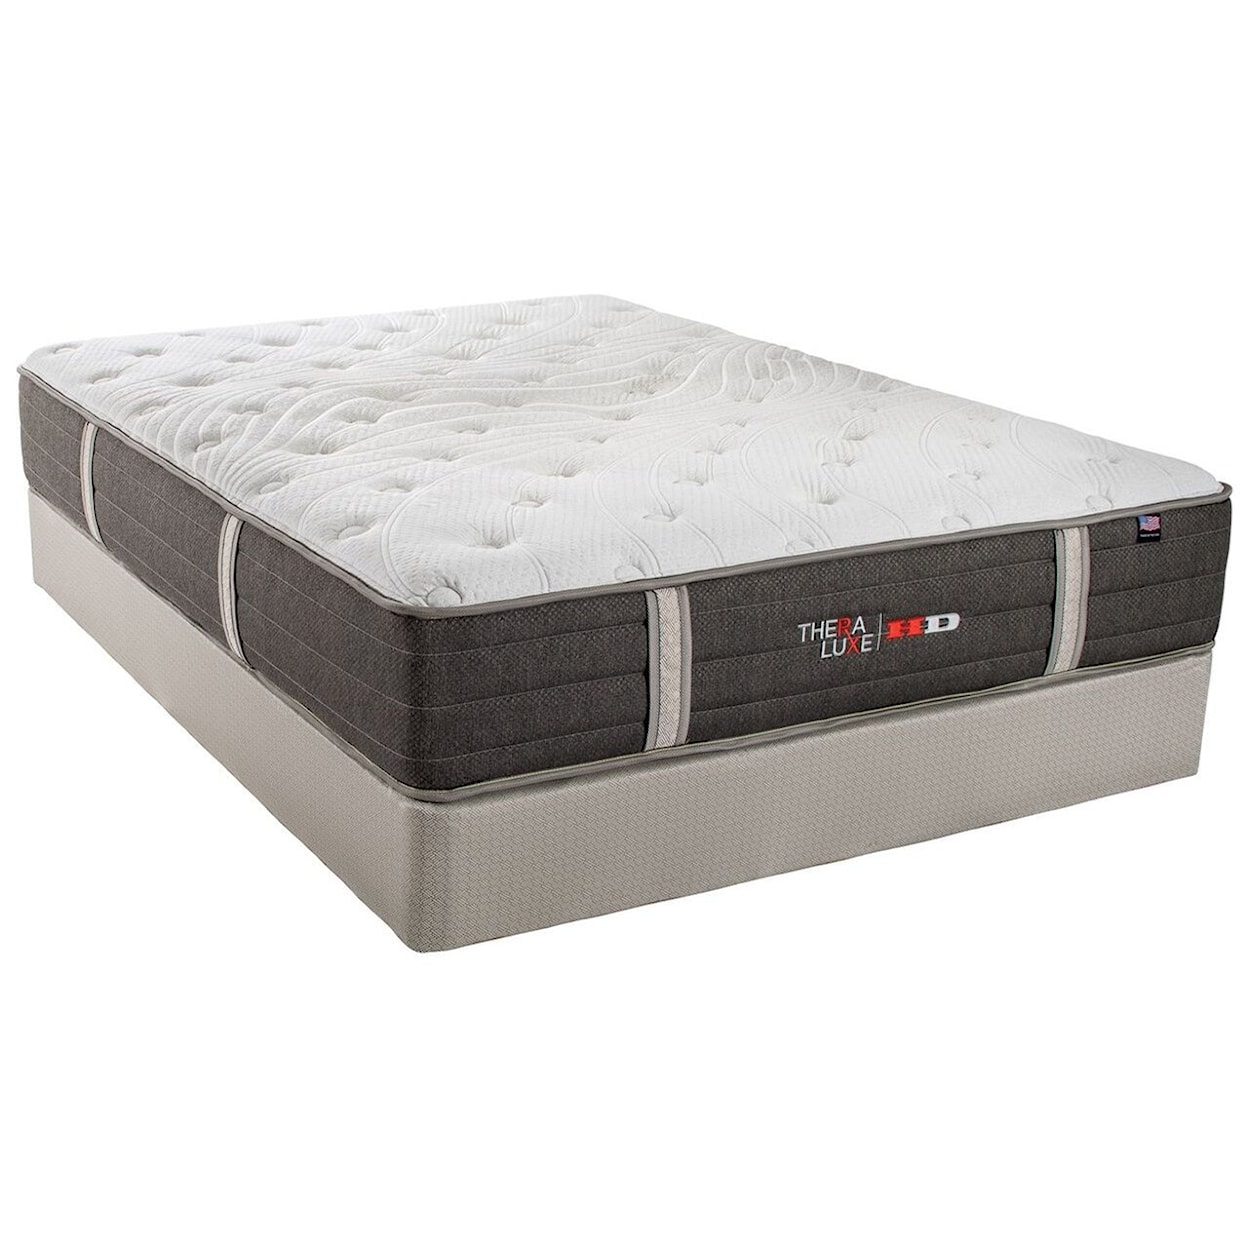 Therapedic Thera Luxe HD Balsam Twin Firm Pocketed Coil Mattress Set